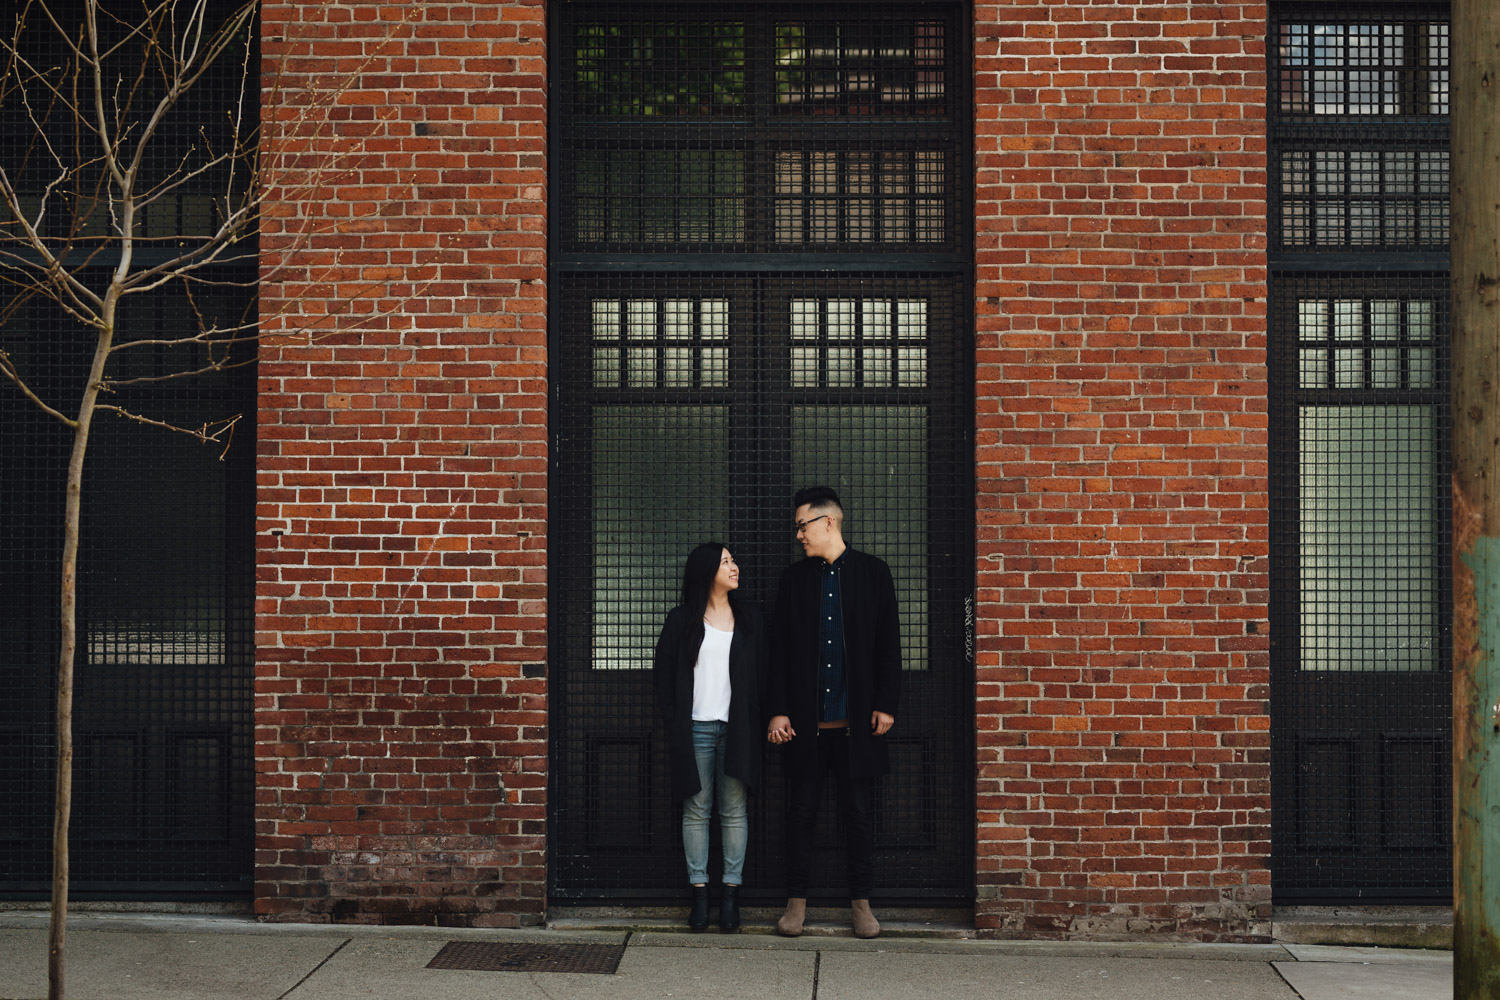 gastown bricks engagement photography in vancouver, bc